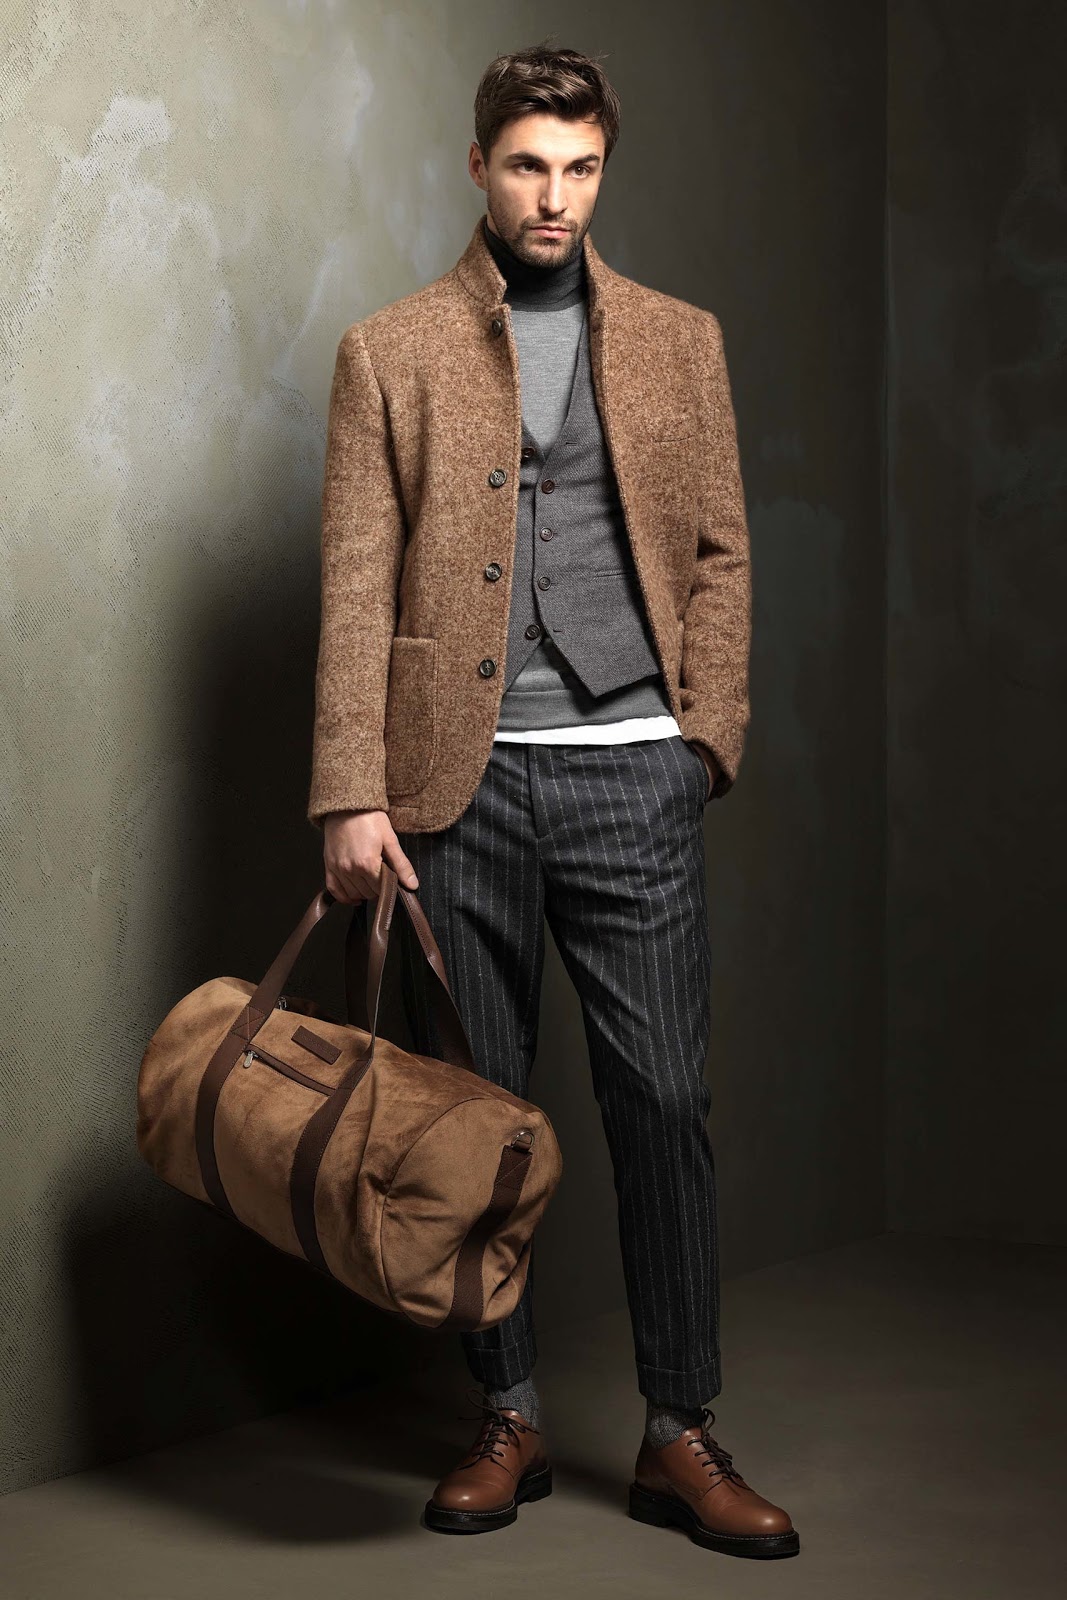 My Favorites From The Brunello Cucinelli Fall/Winter Collection